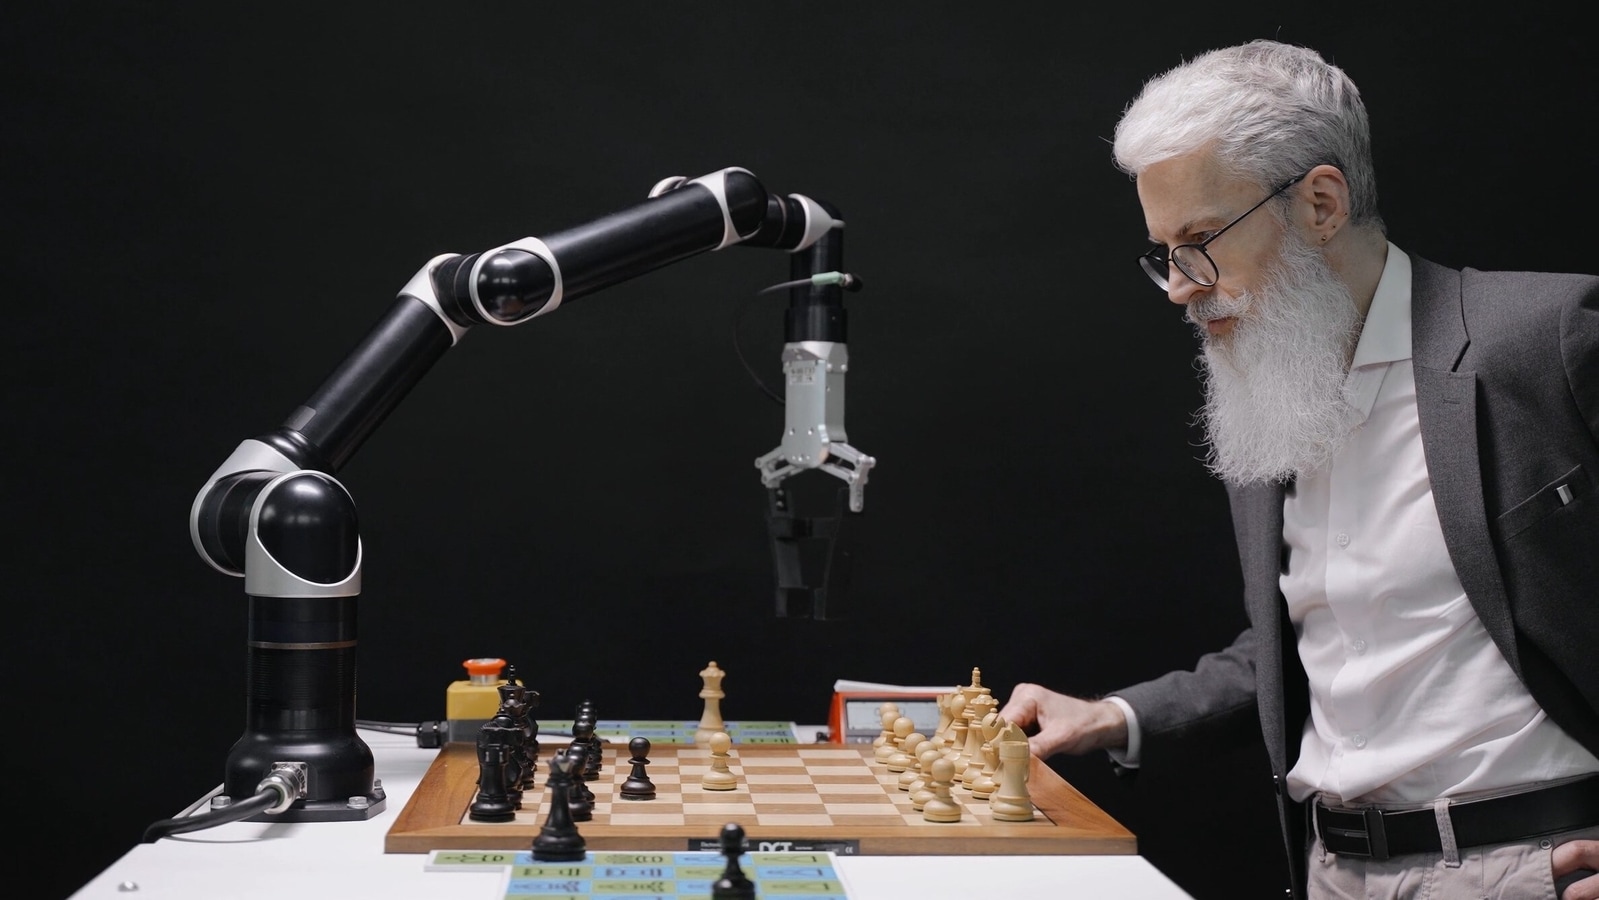 Hans Niemann cheated at chess more than 100 times, new report alleges